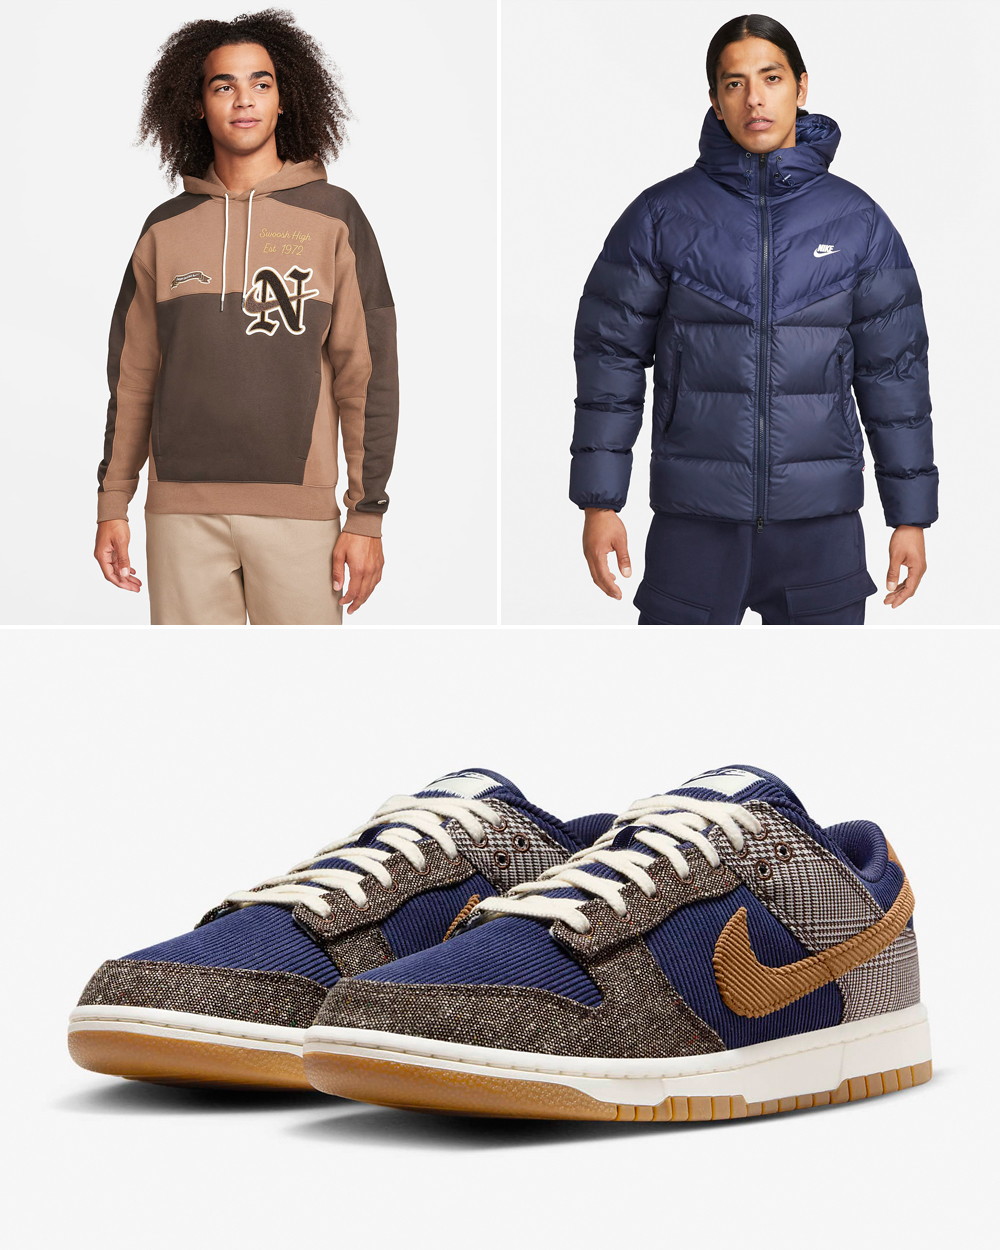 Nike-Dunk-Low-Tweed-Corduroy-Outfits